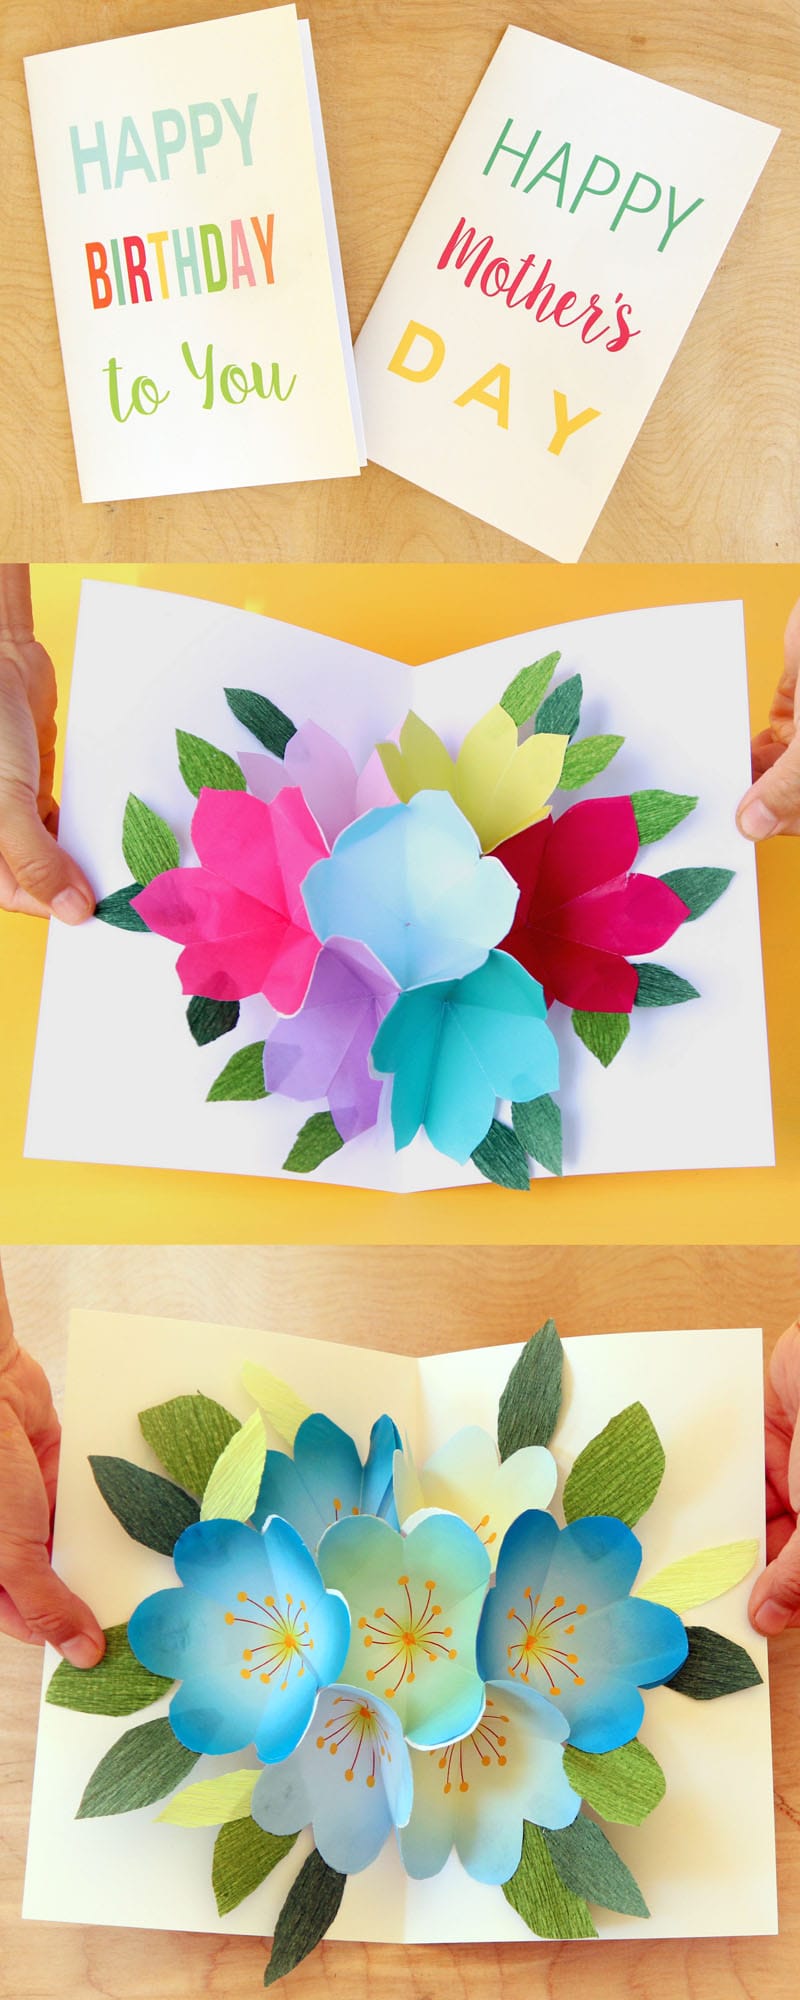 Free Printable Happy Birthday Card with Pop Up Bouquet - A Piece Intended For Happy Birthday Pop Up Card Free Template